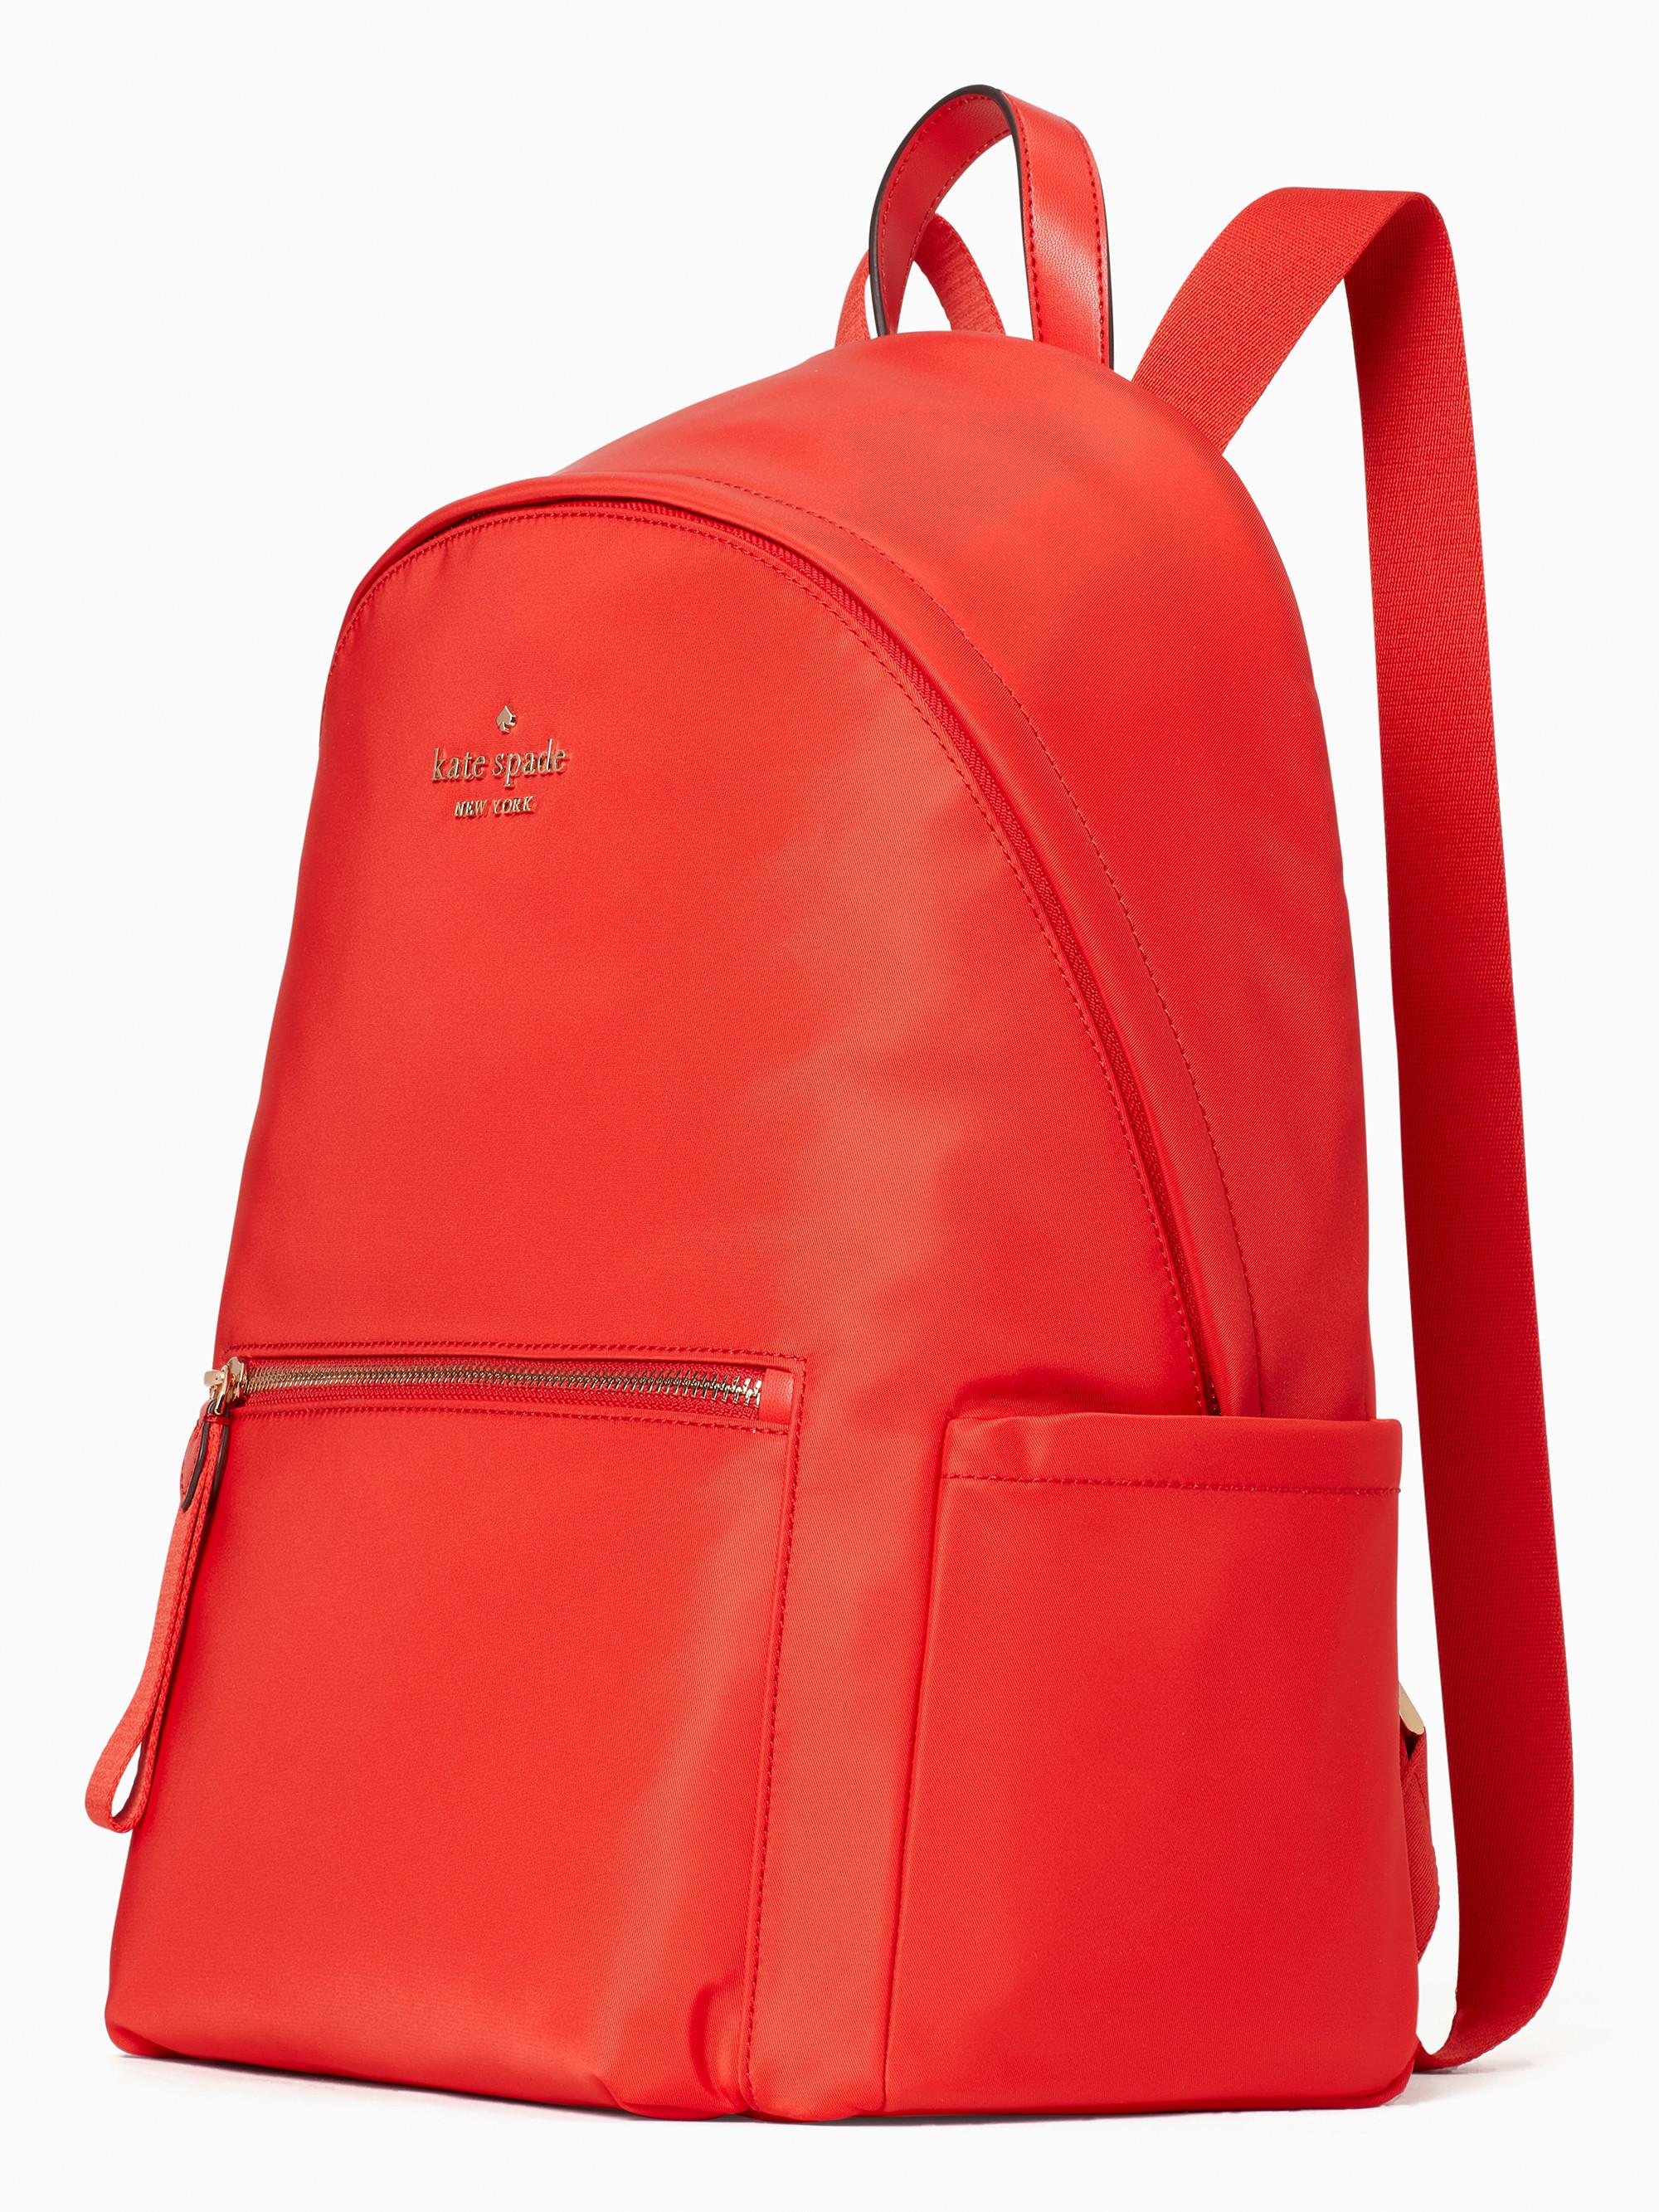 Kate Spade Chelsea Large Backpack in Red | Lyst UK